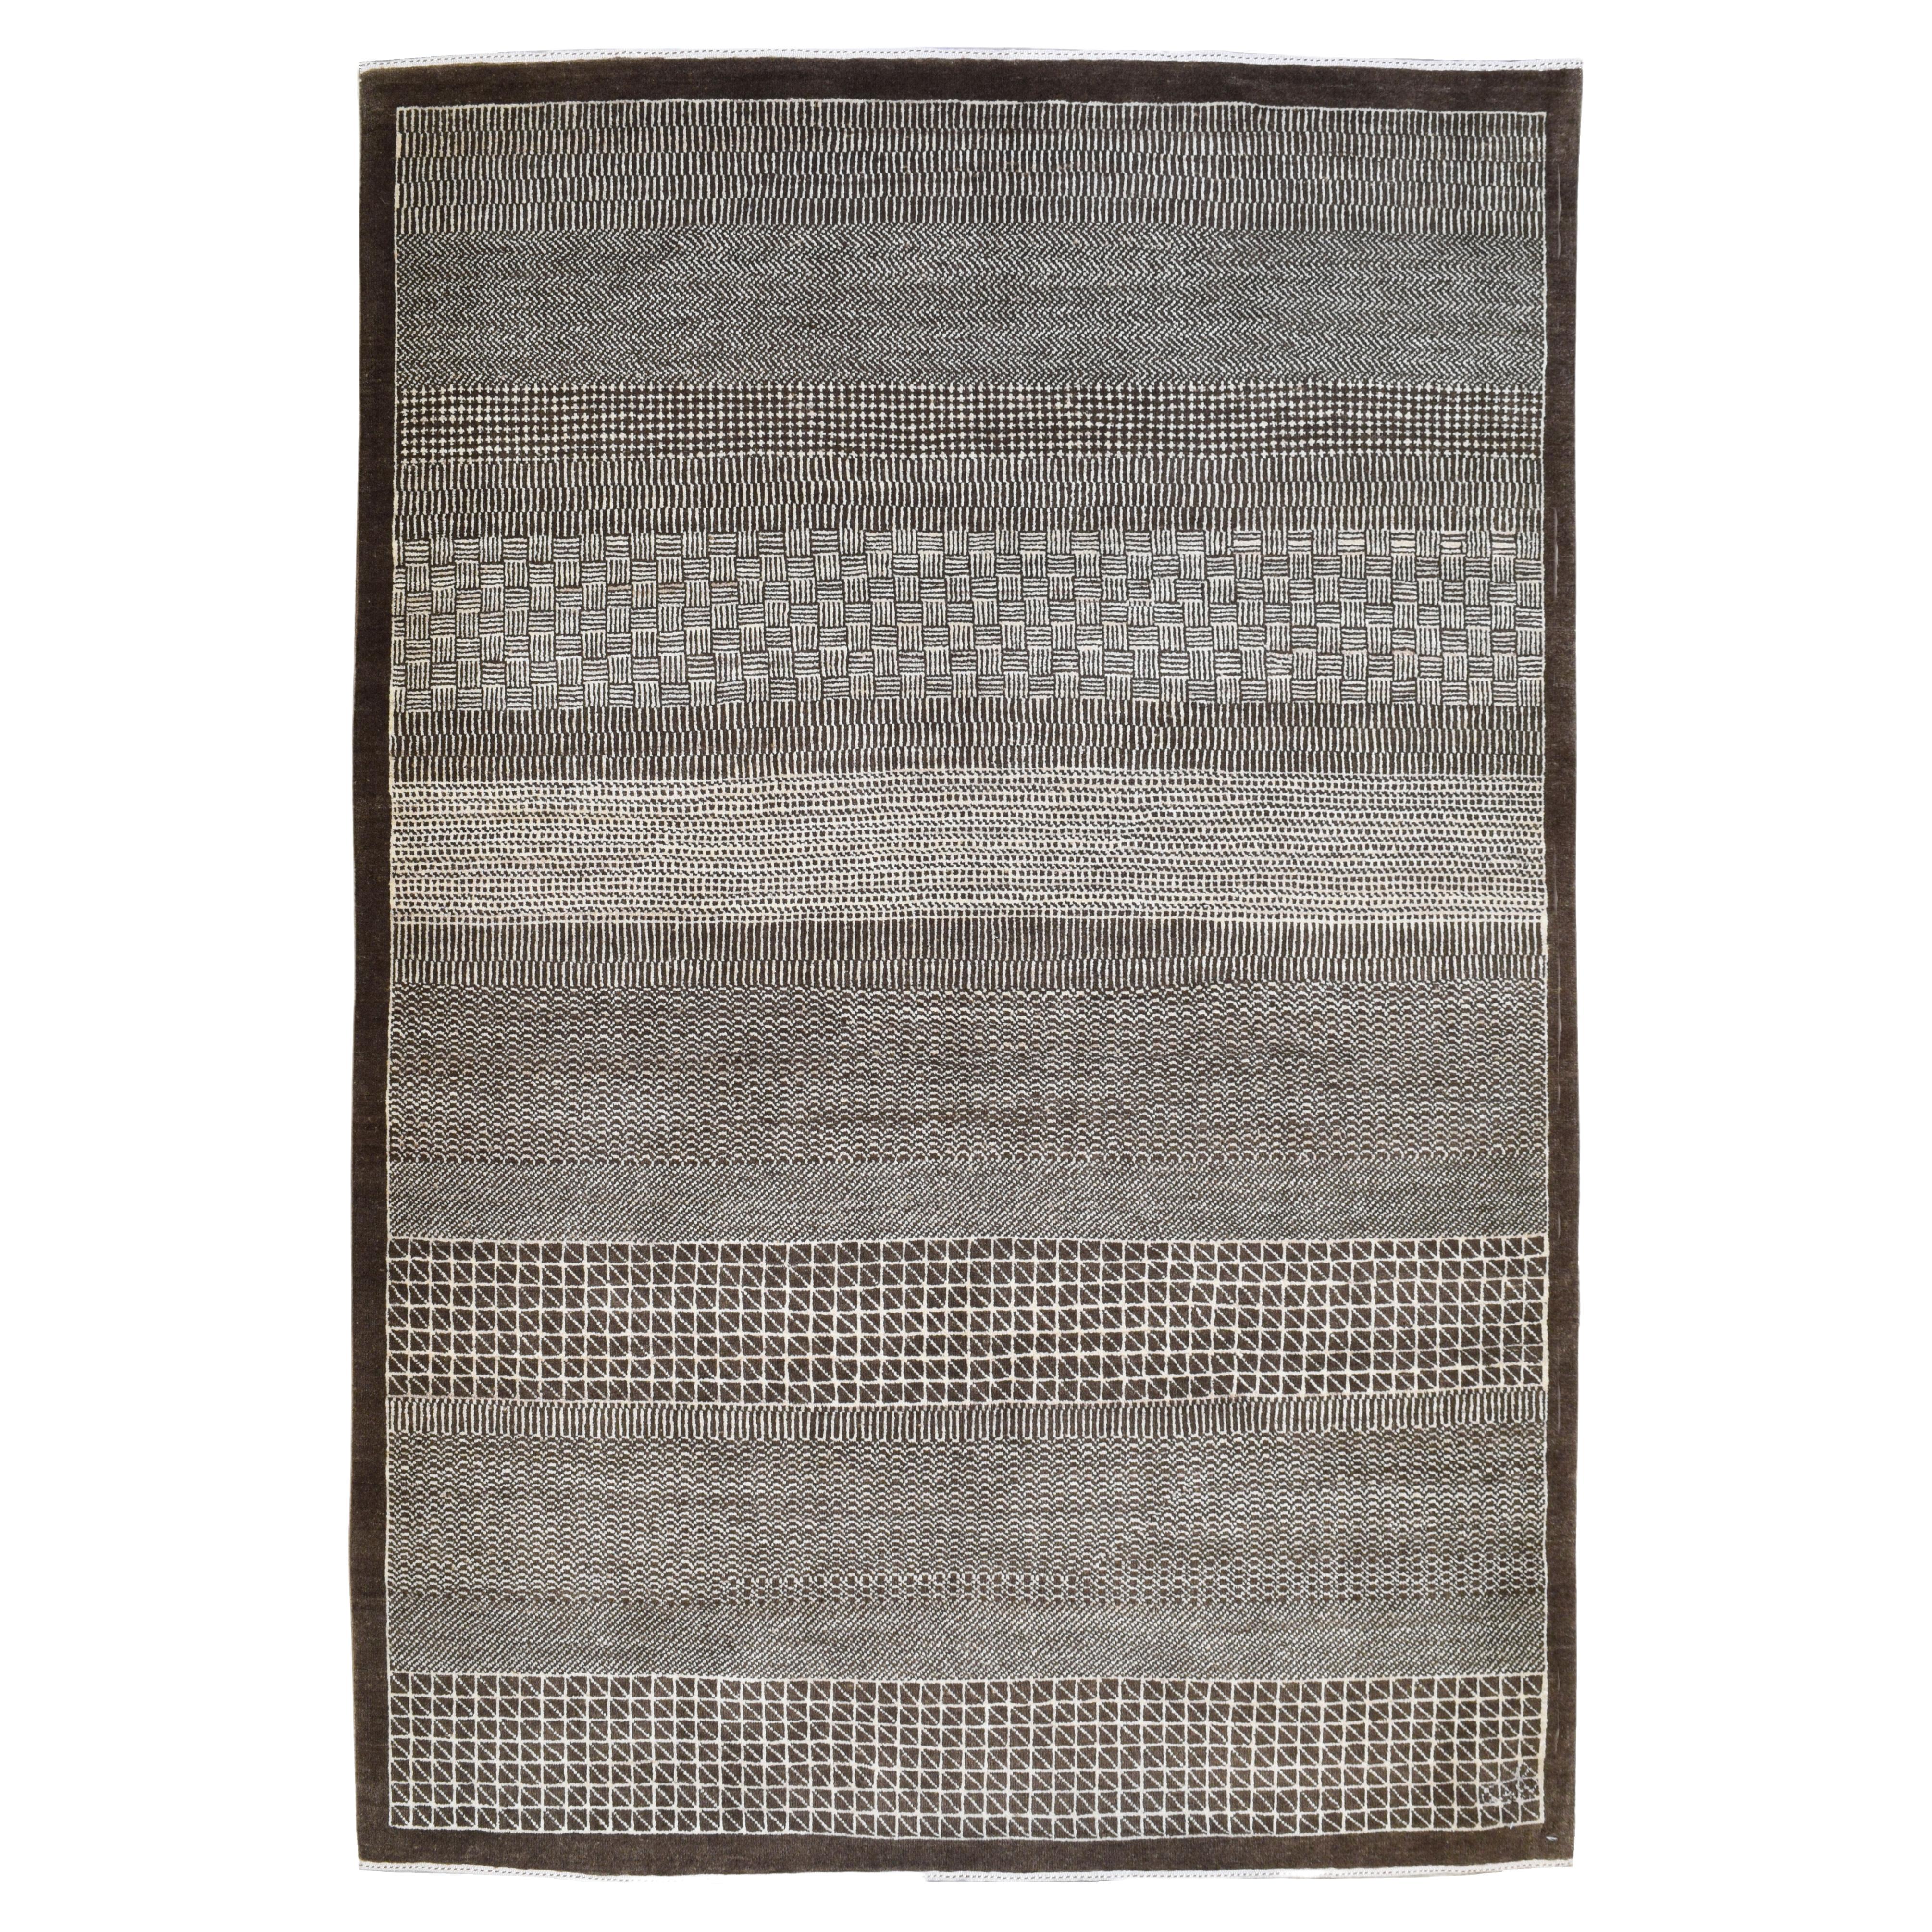 Brown and Cream Modern Architectural "Rain" Area Rug from Orley Shabahang, 5 x 7 For Sale